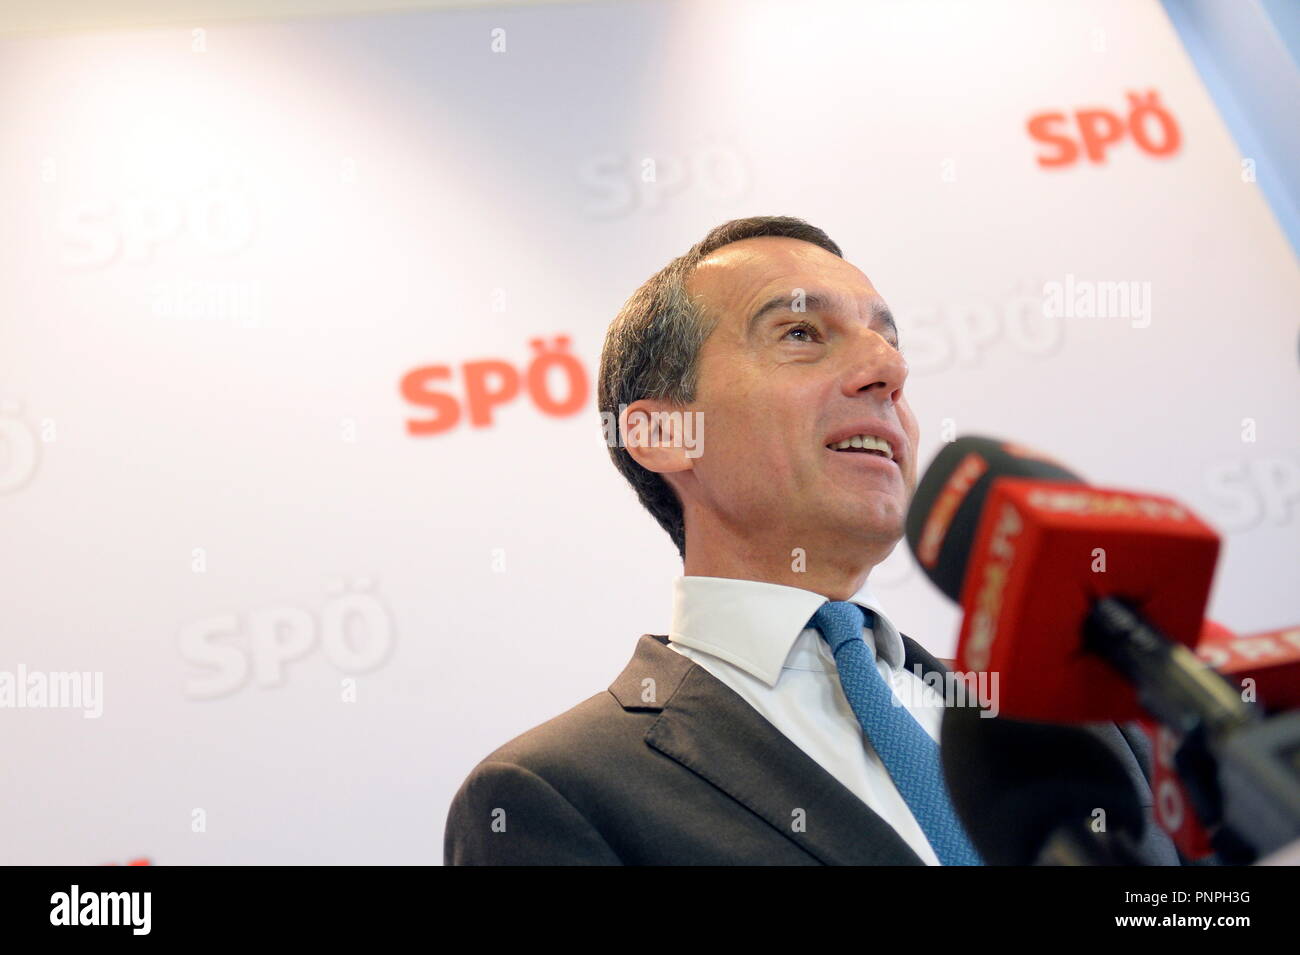 Vienna, Austria. September 22, 2018. Press statement by the party chairman of the SPÖ (Social Democratic Party of Austria), Christian Kern. Christian Kern has announced his resignation from the party presidency, possible successor is Pamela Rendi-Wagner. Picture shows former Chancellor Christian Kern.  Credit: Franz Perc / Alamy Live News Stock Photo